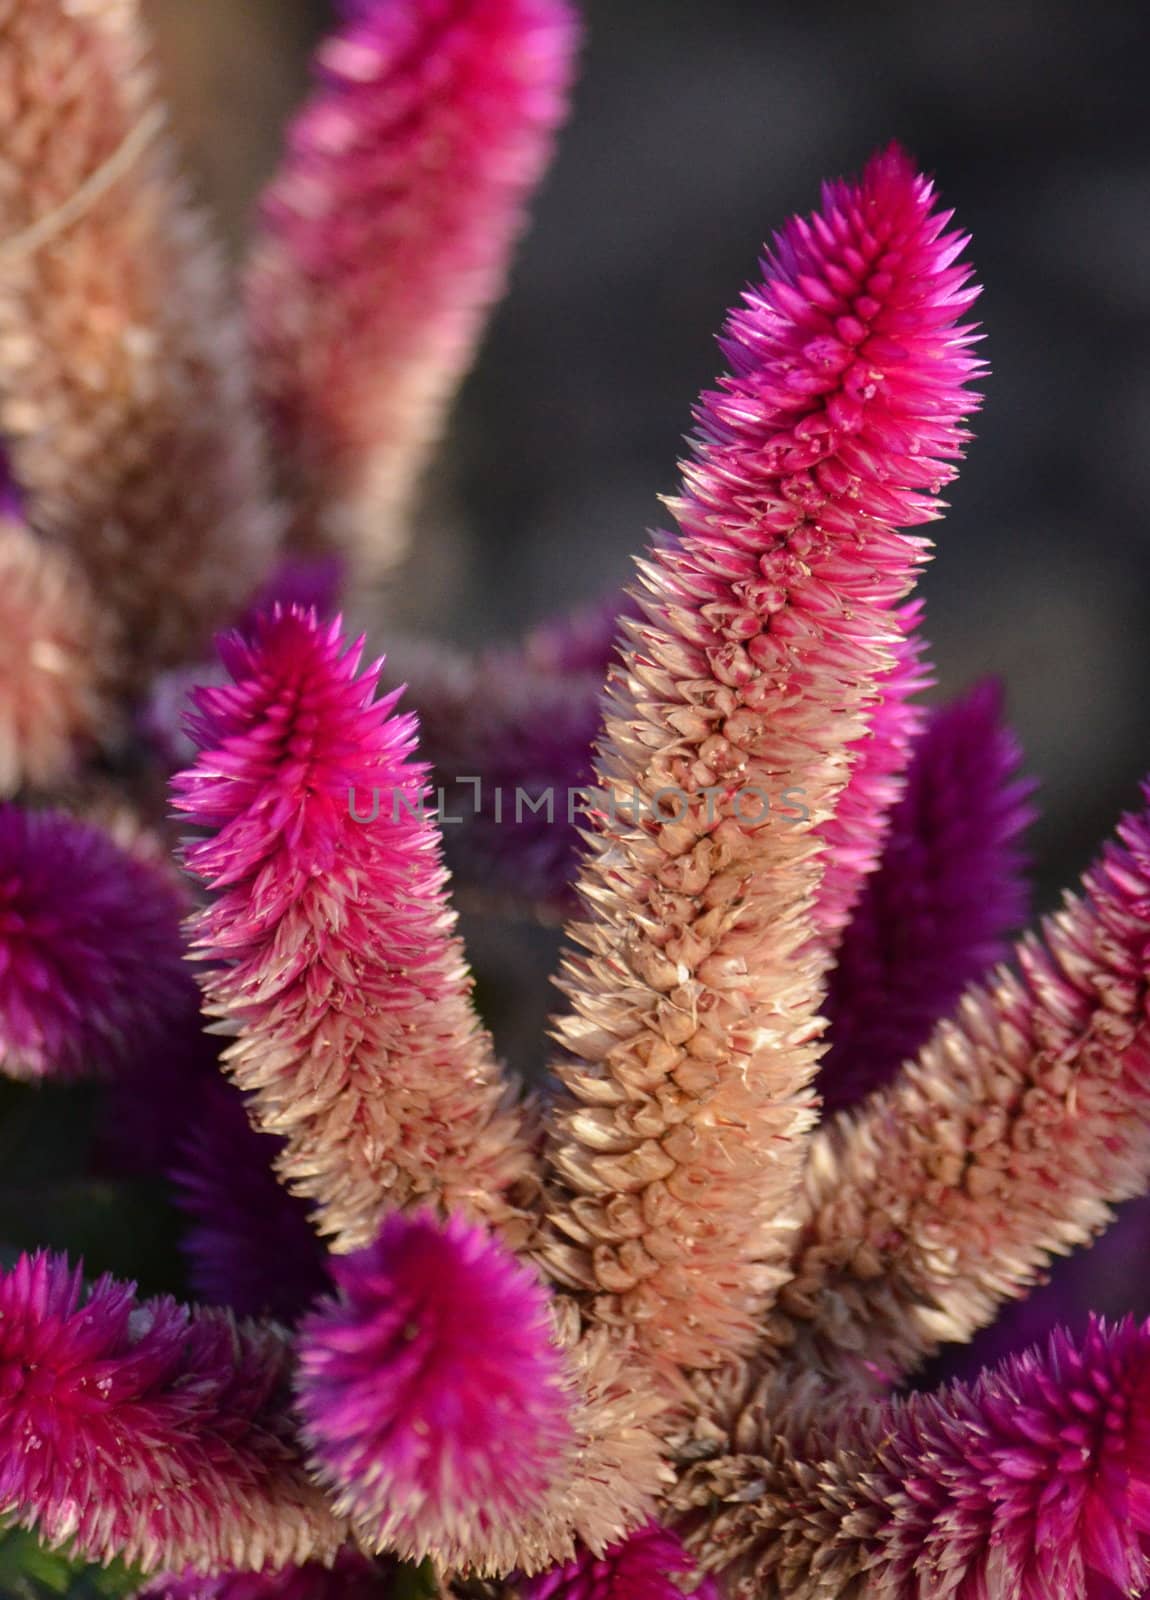 Fuzzy pink and purple flowers by KirbyWalkerPhotos